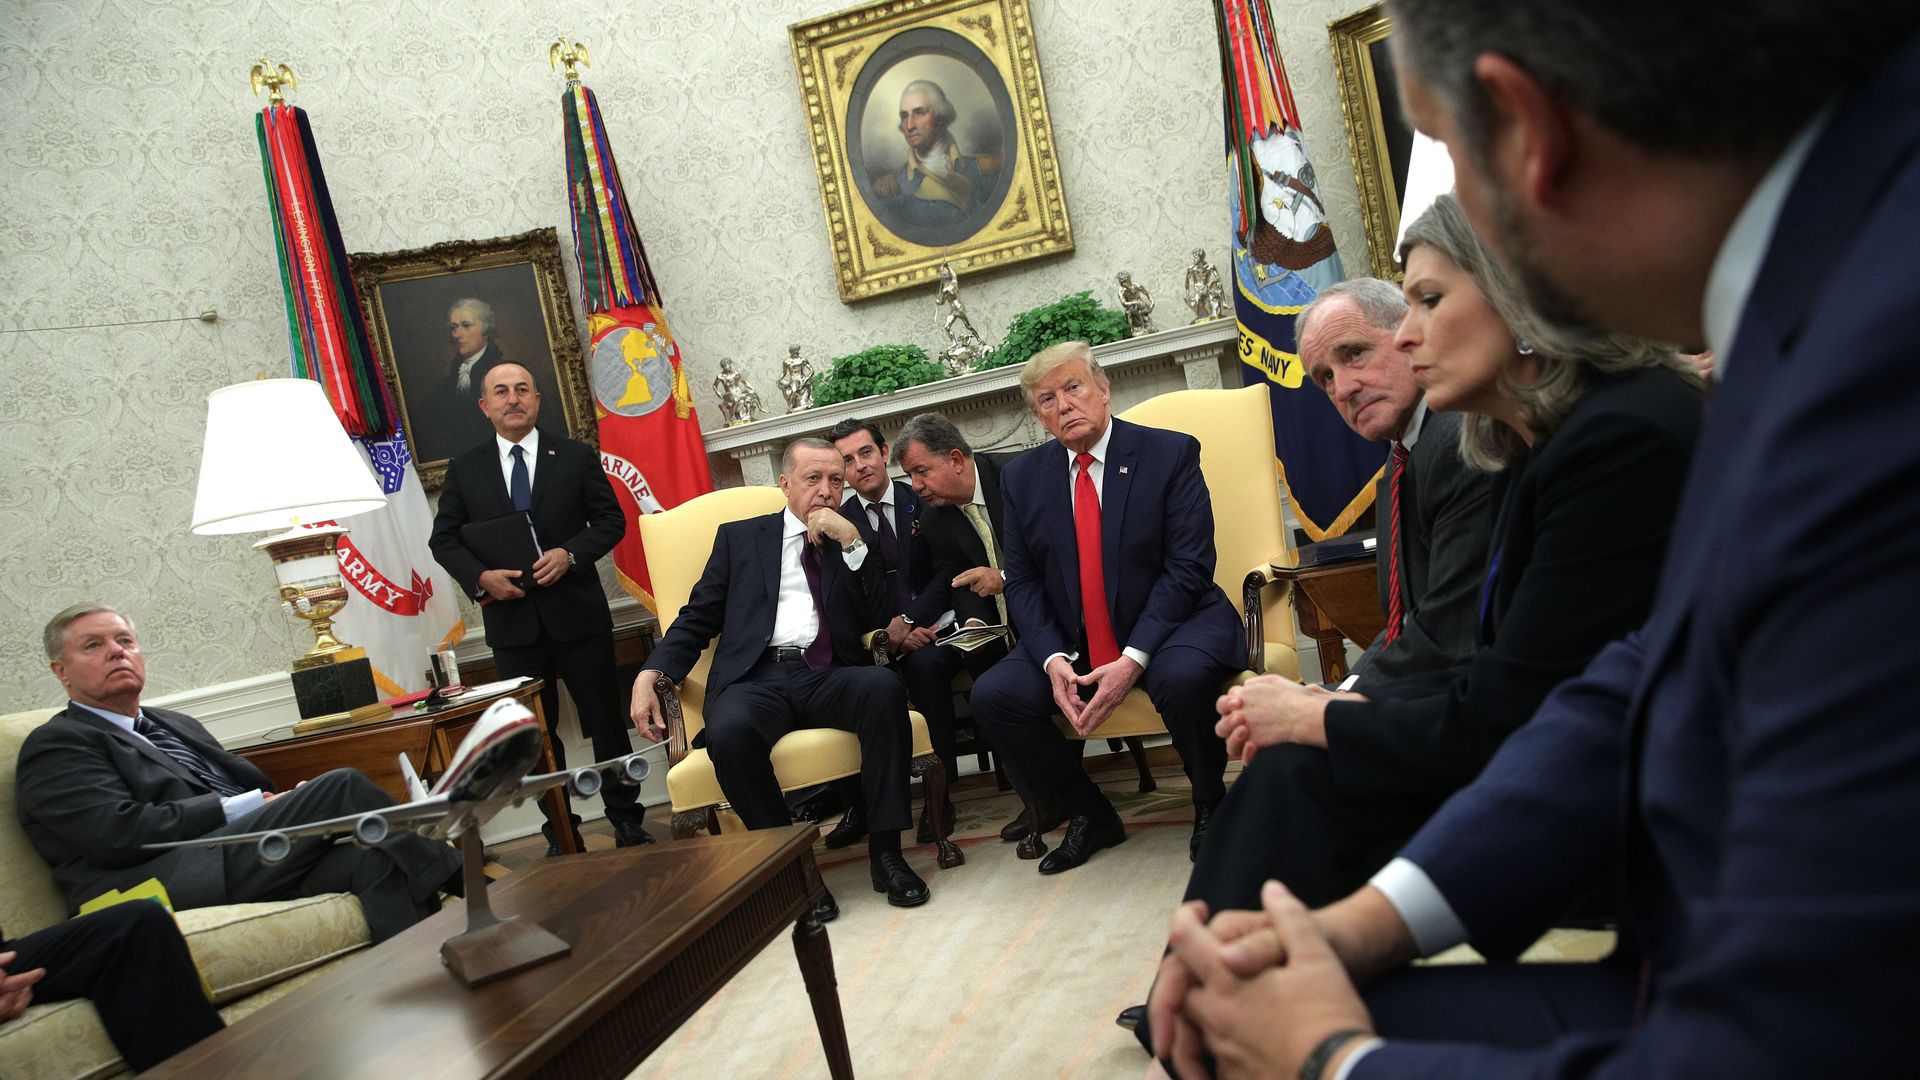 Erdogan in the Oval Office with Senators and Trump